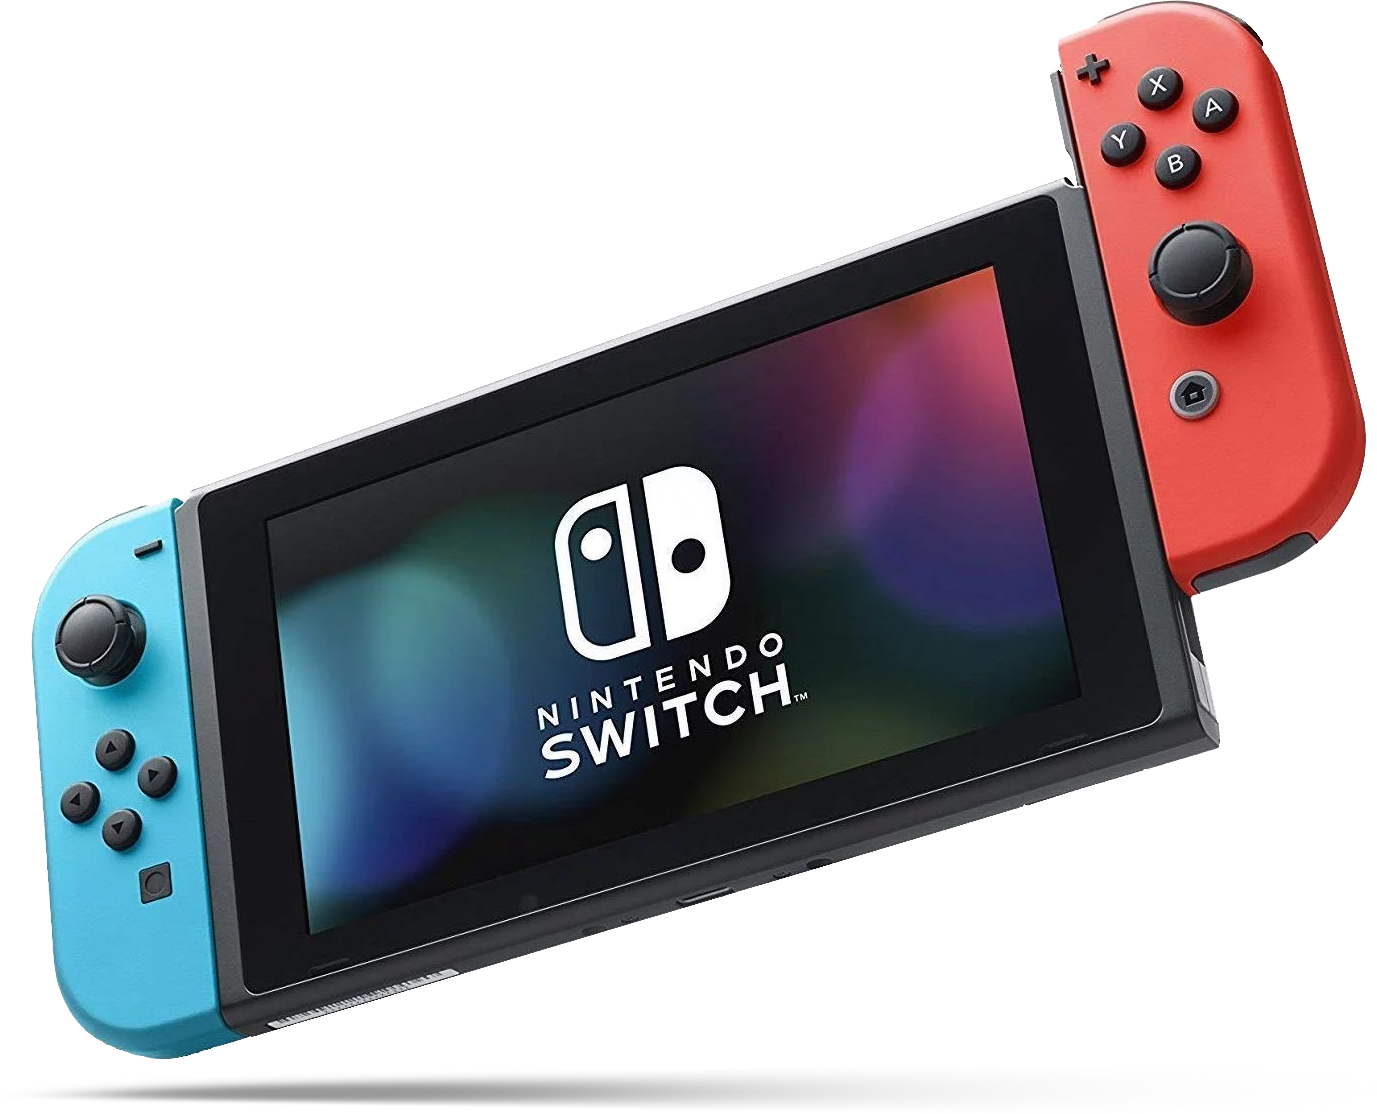 https://www.imore.com/sites/imore.com/files/styles/small/public/field/image/2020/02/nintendo-switch-product-image.png